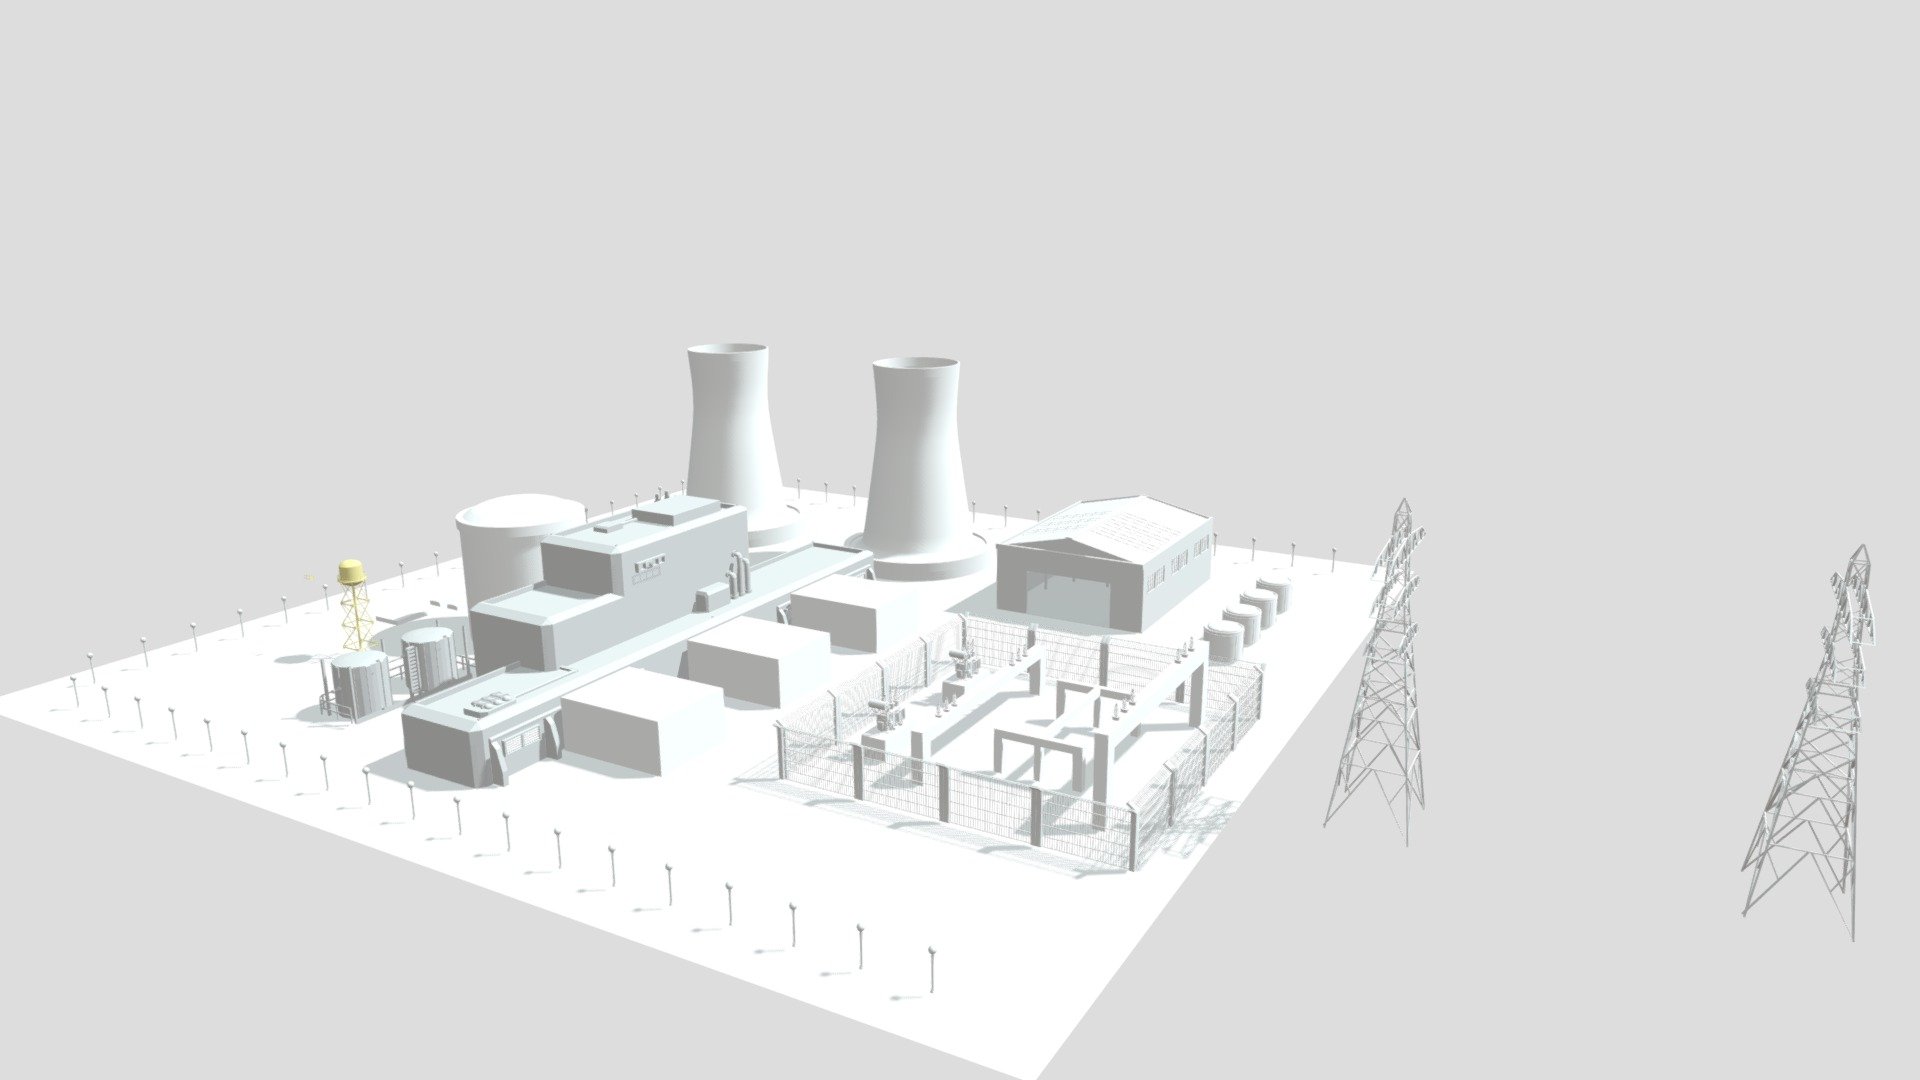 A simple 3D model for a nuclear power plant designed as part of a semester project for EE-411 Power Generation at the Department of Electrical Engineering, NEDUET, Karachi 3d model